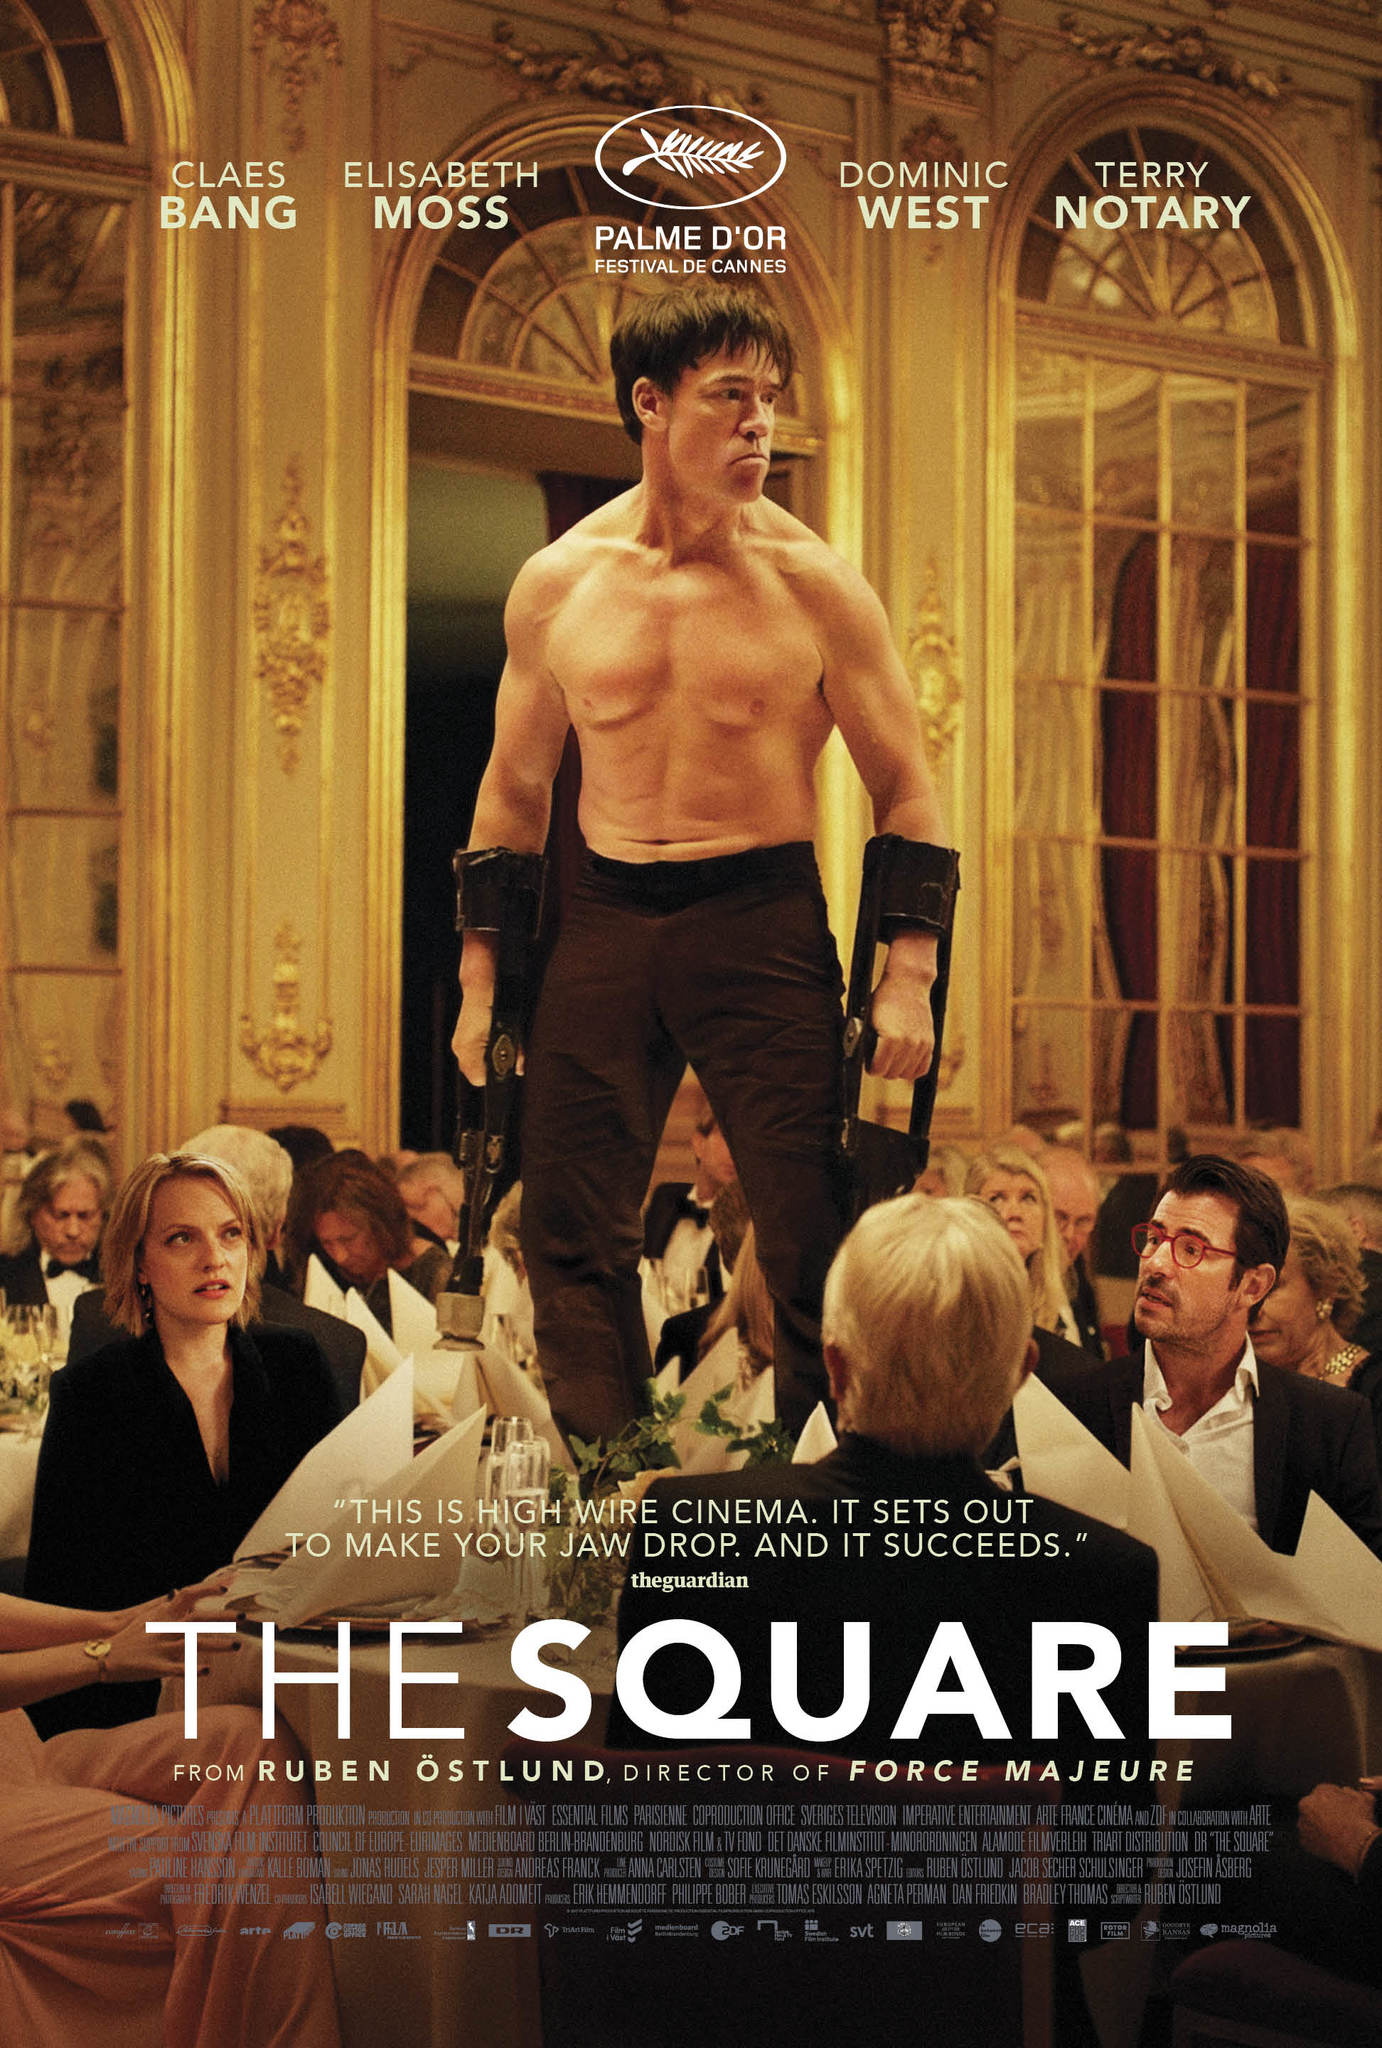 The Square film poster